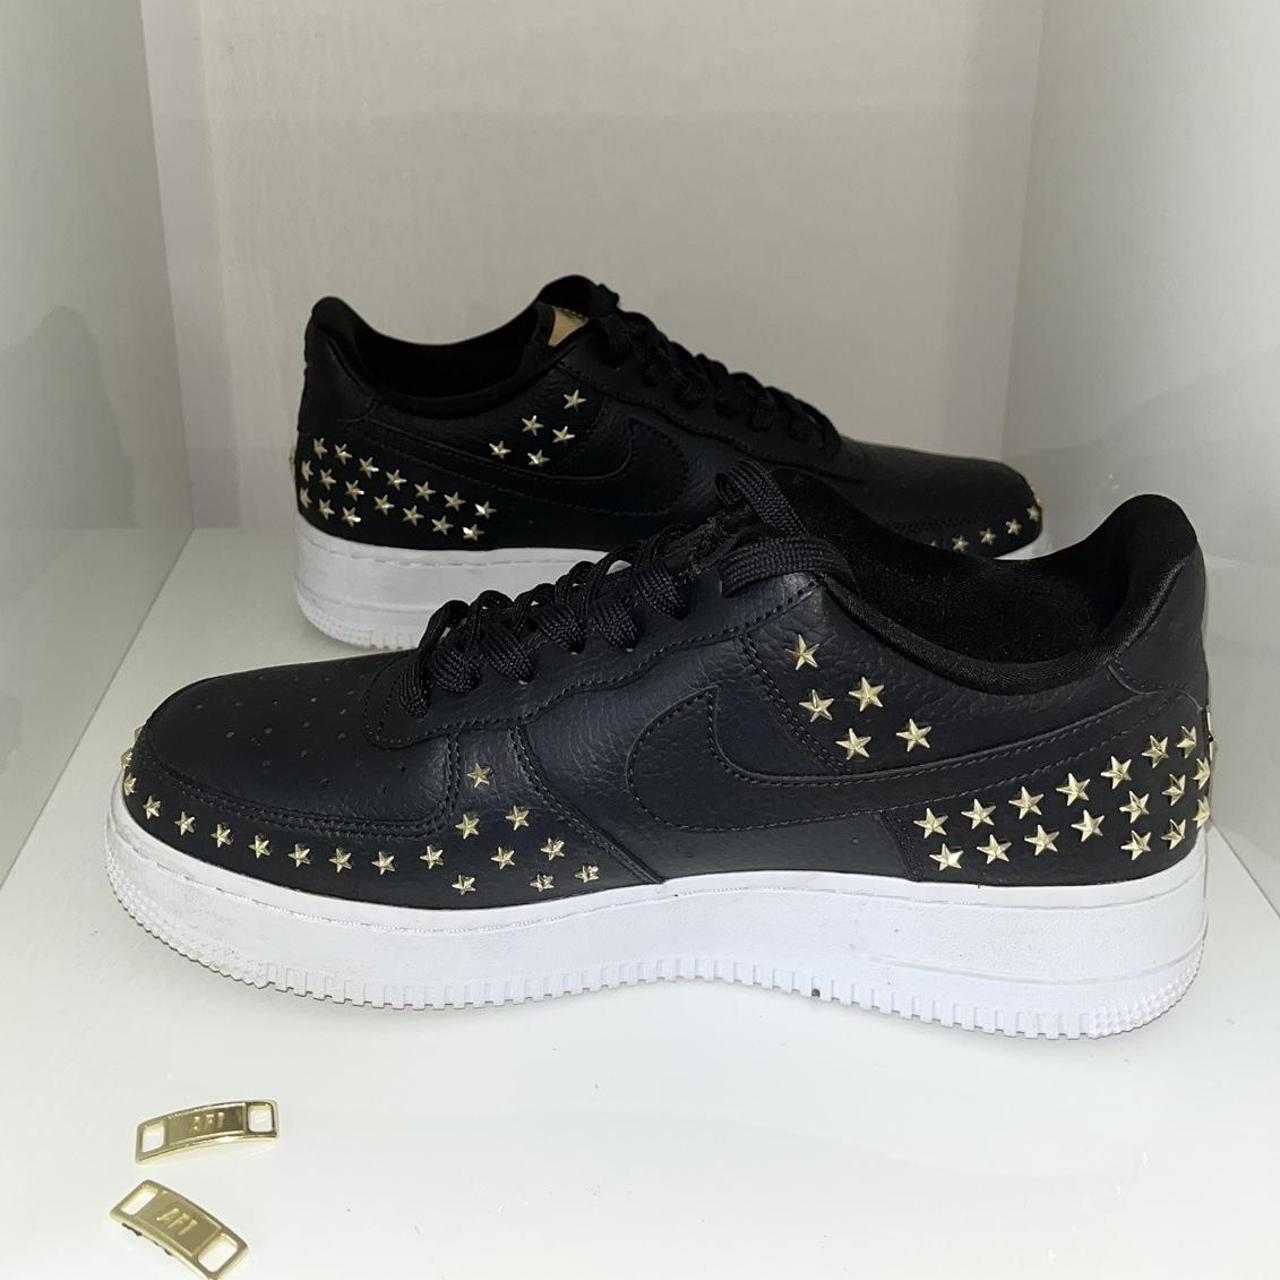 Nike Women's Black and Gold Trainers | Depop